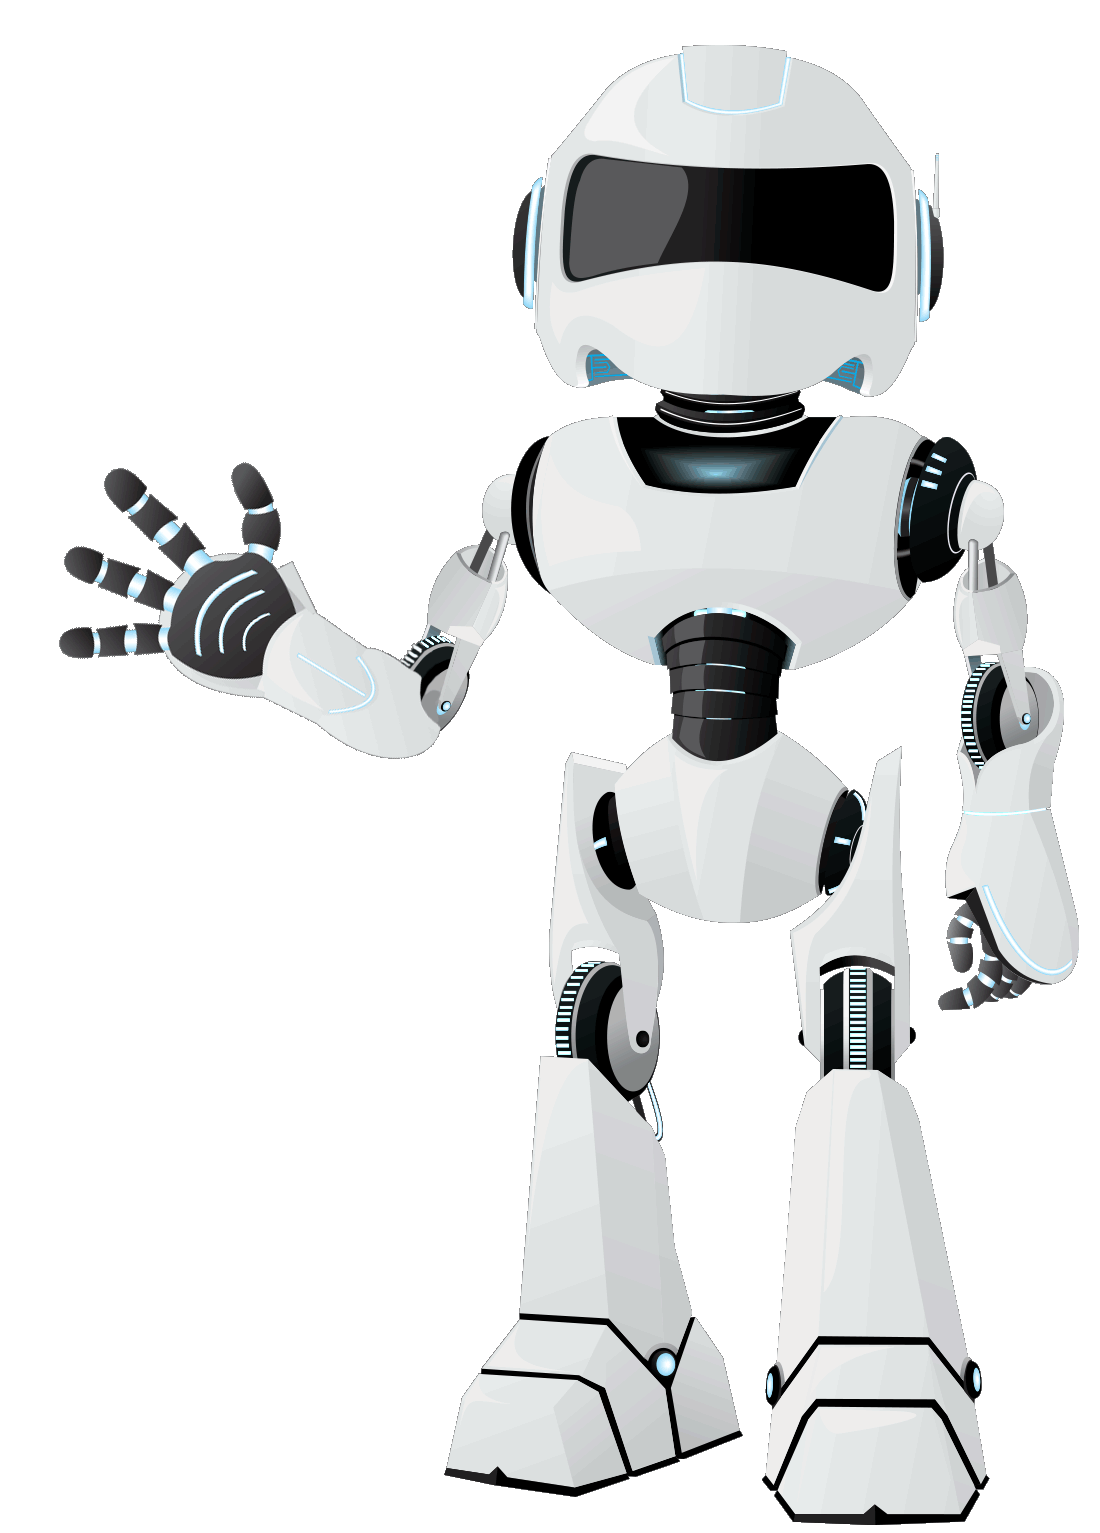 Animated robot pointing to 'SIGN UP HERE' button